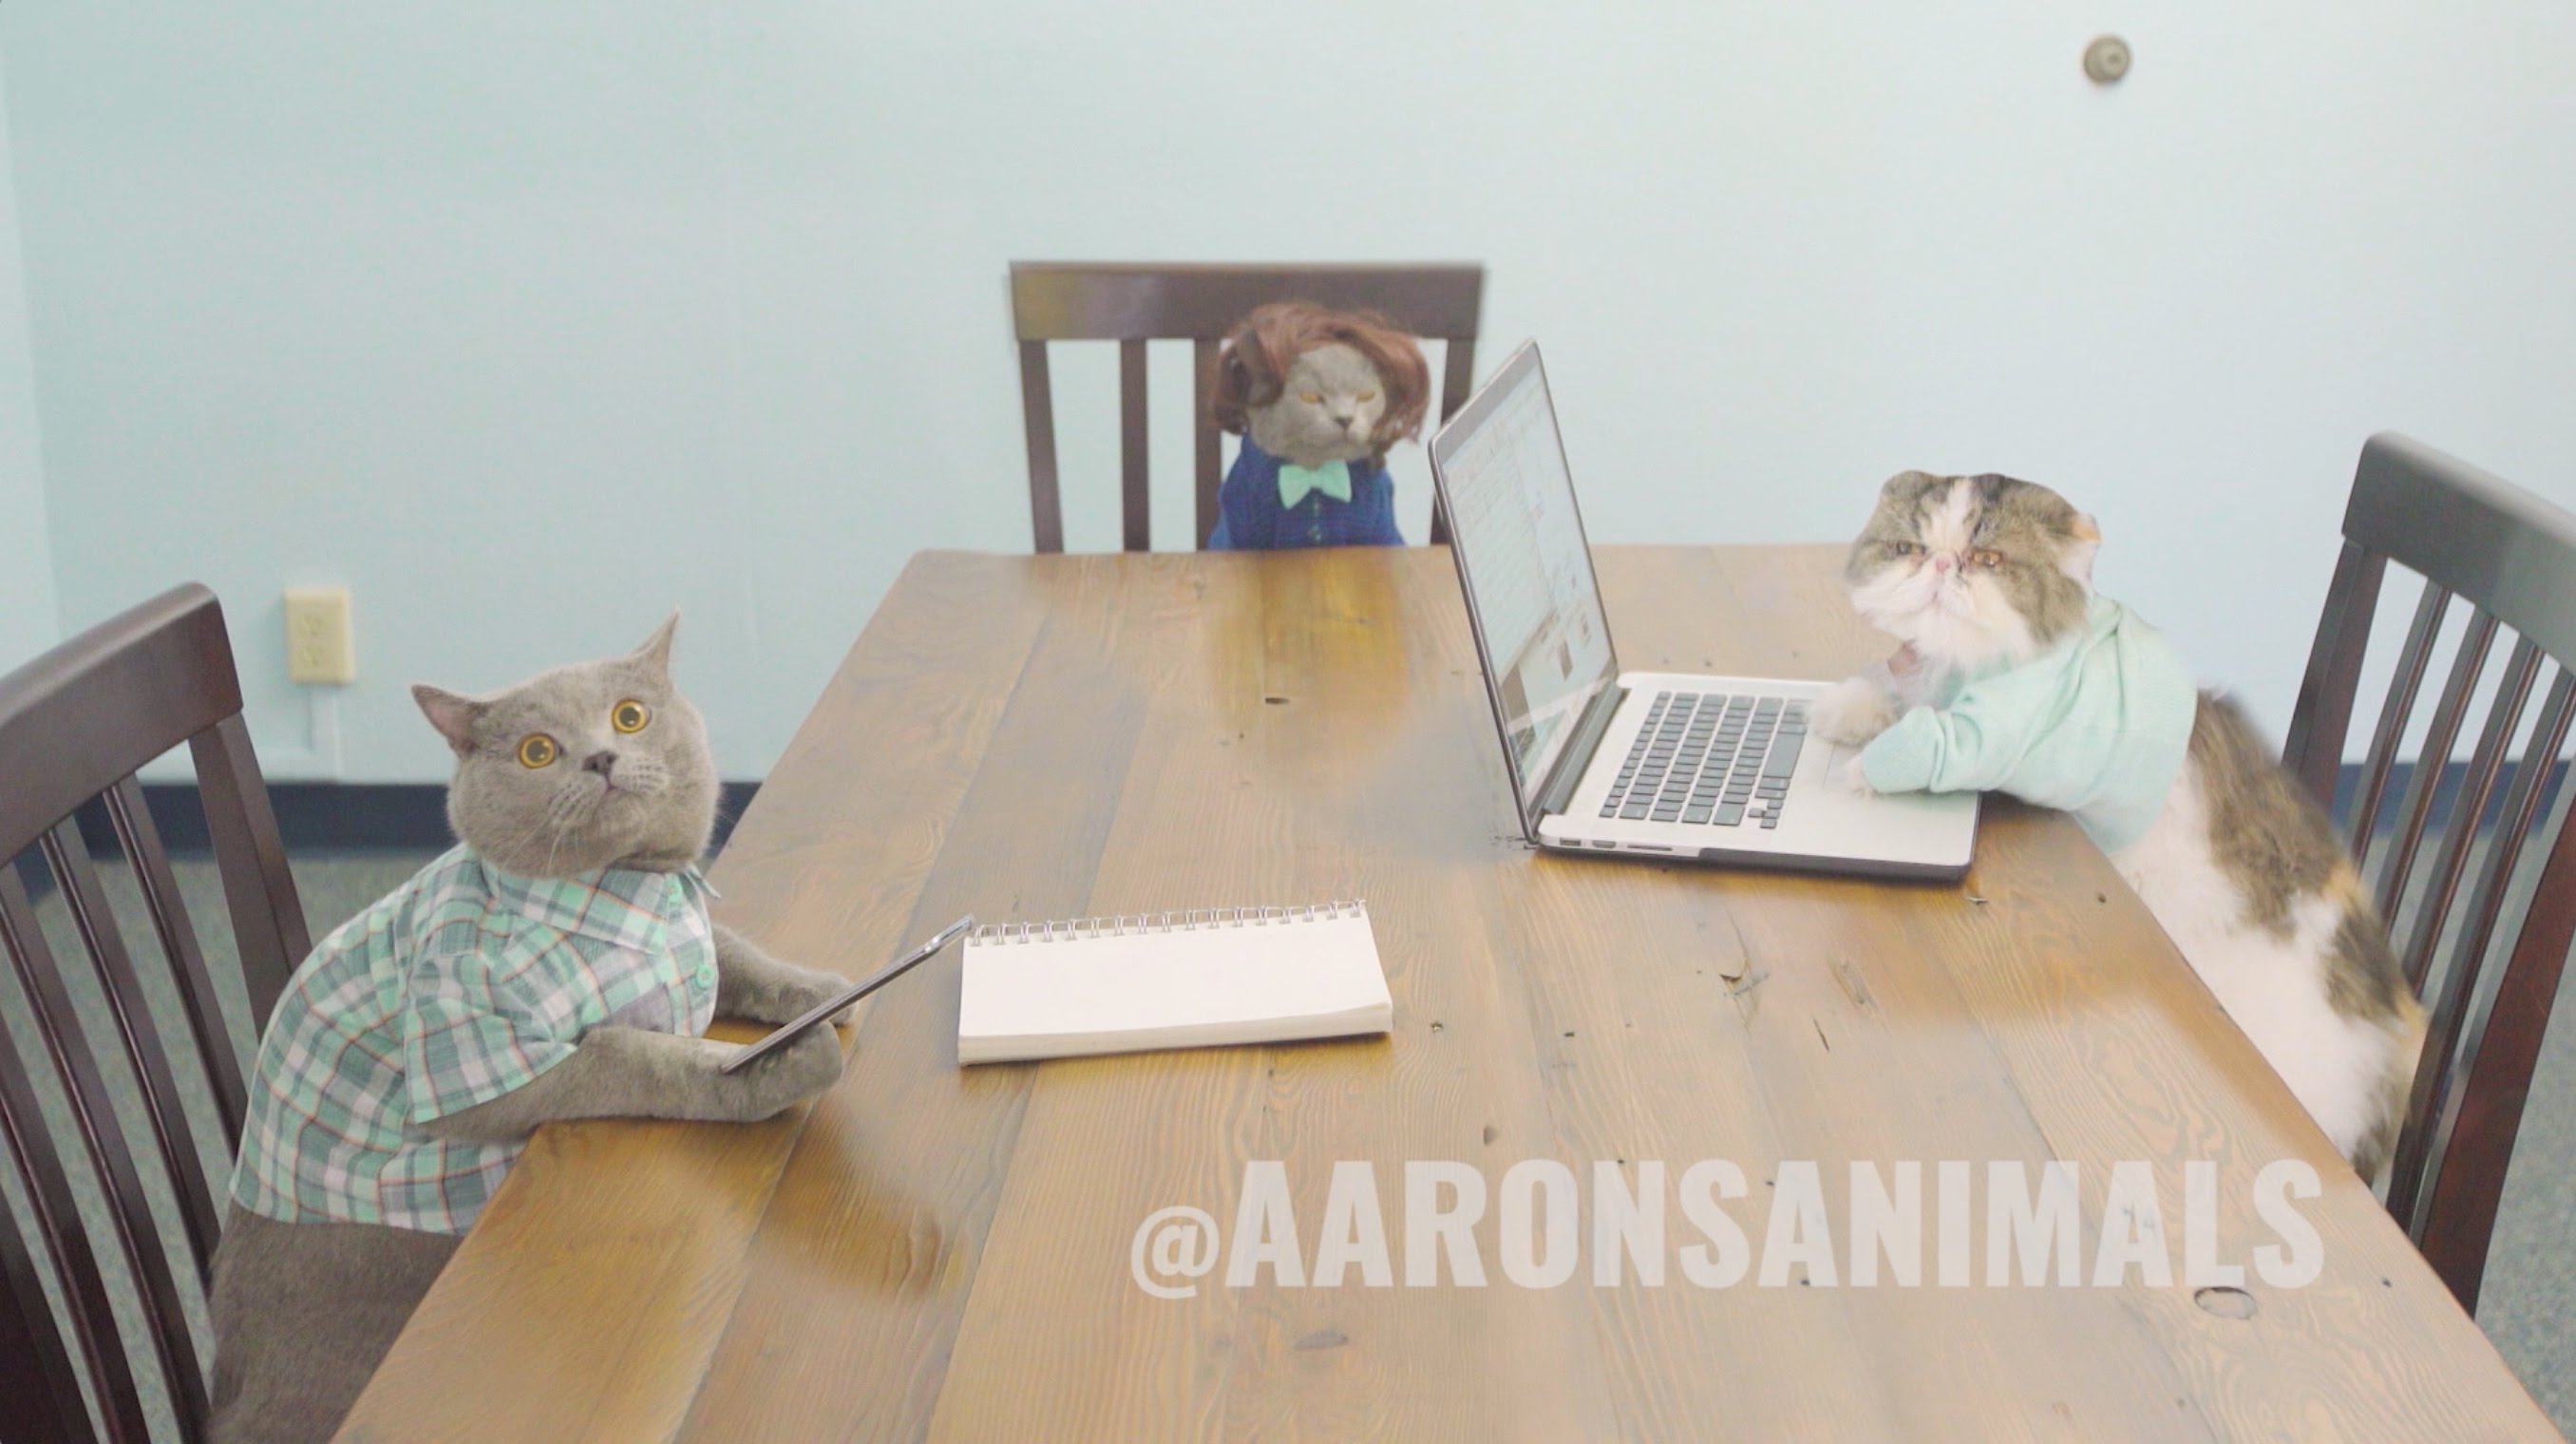 When cats have a meeting in the workplace - Aaron's Animals